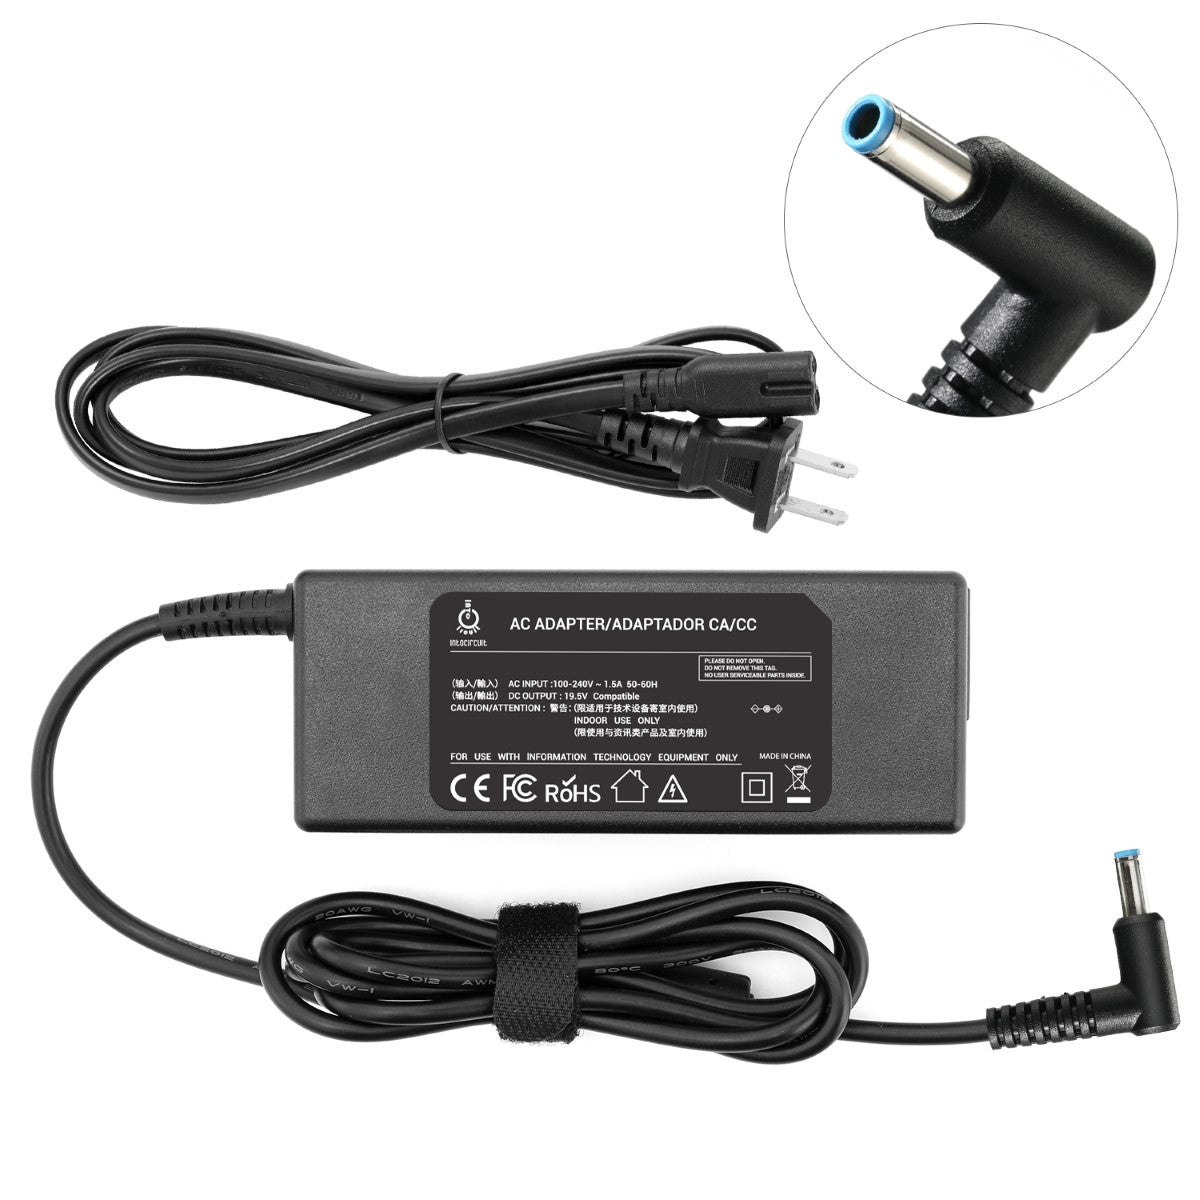 Charger for HP 15-df0013dx Spectre x360 Laptop